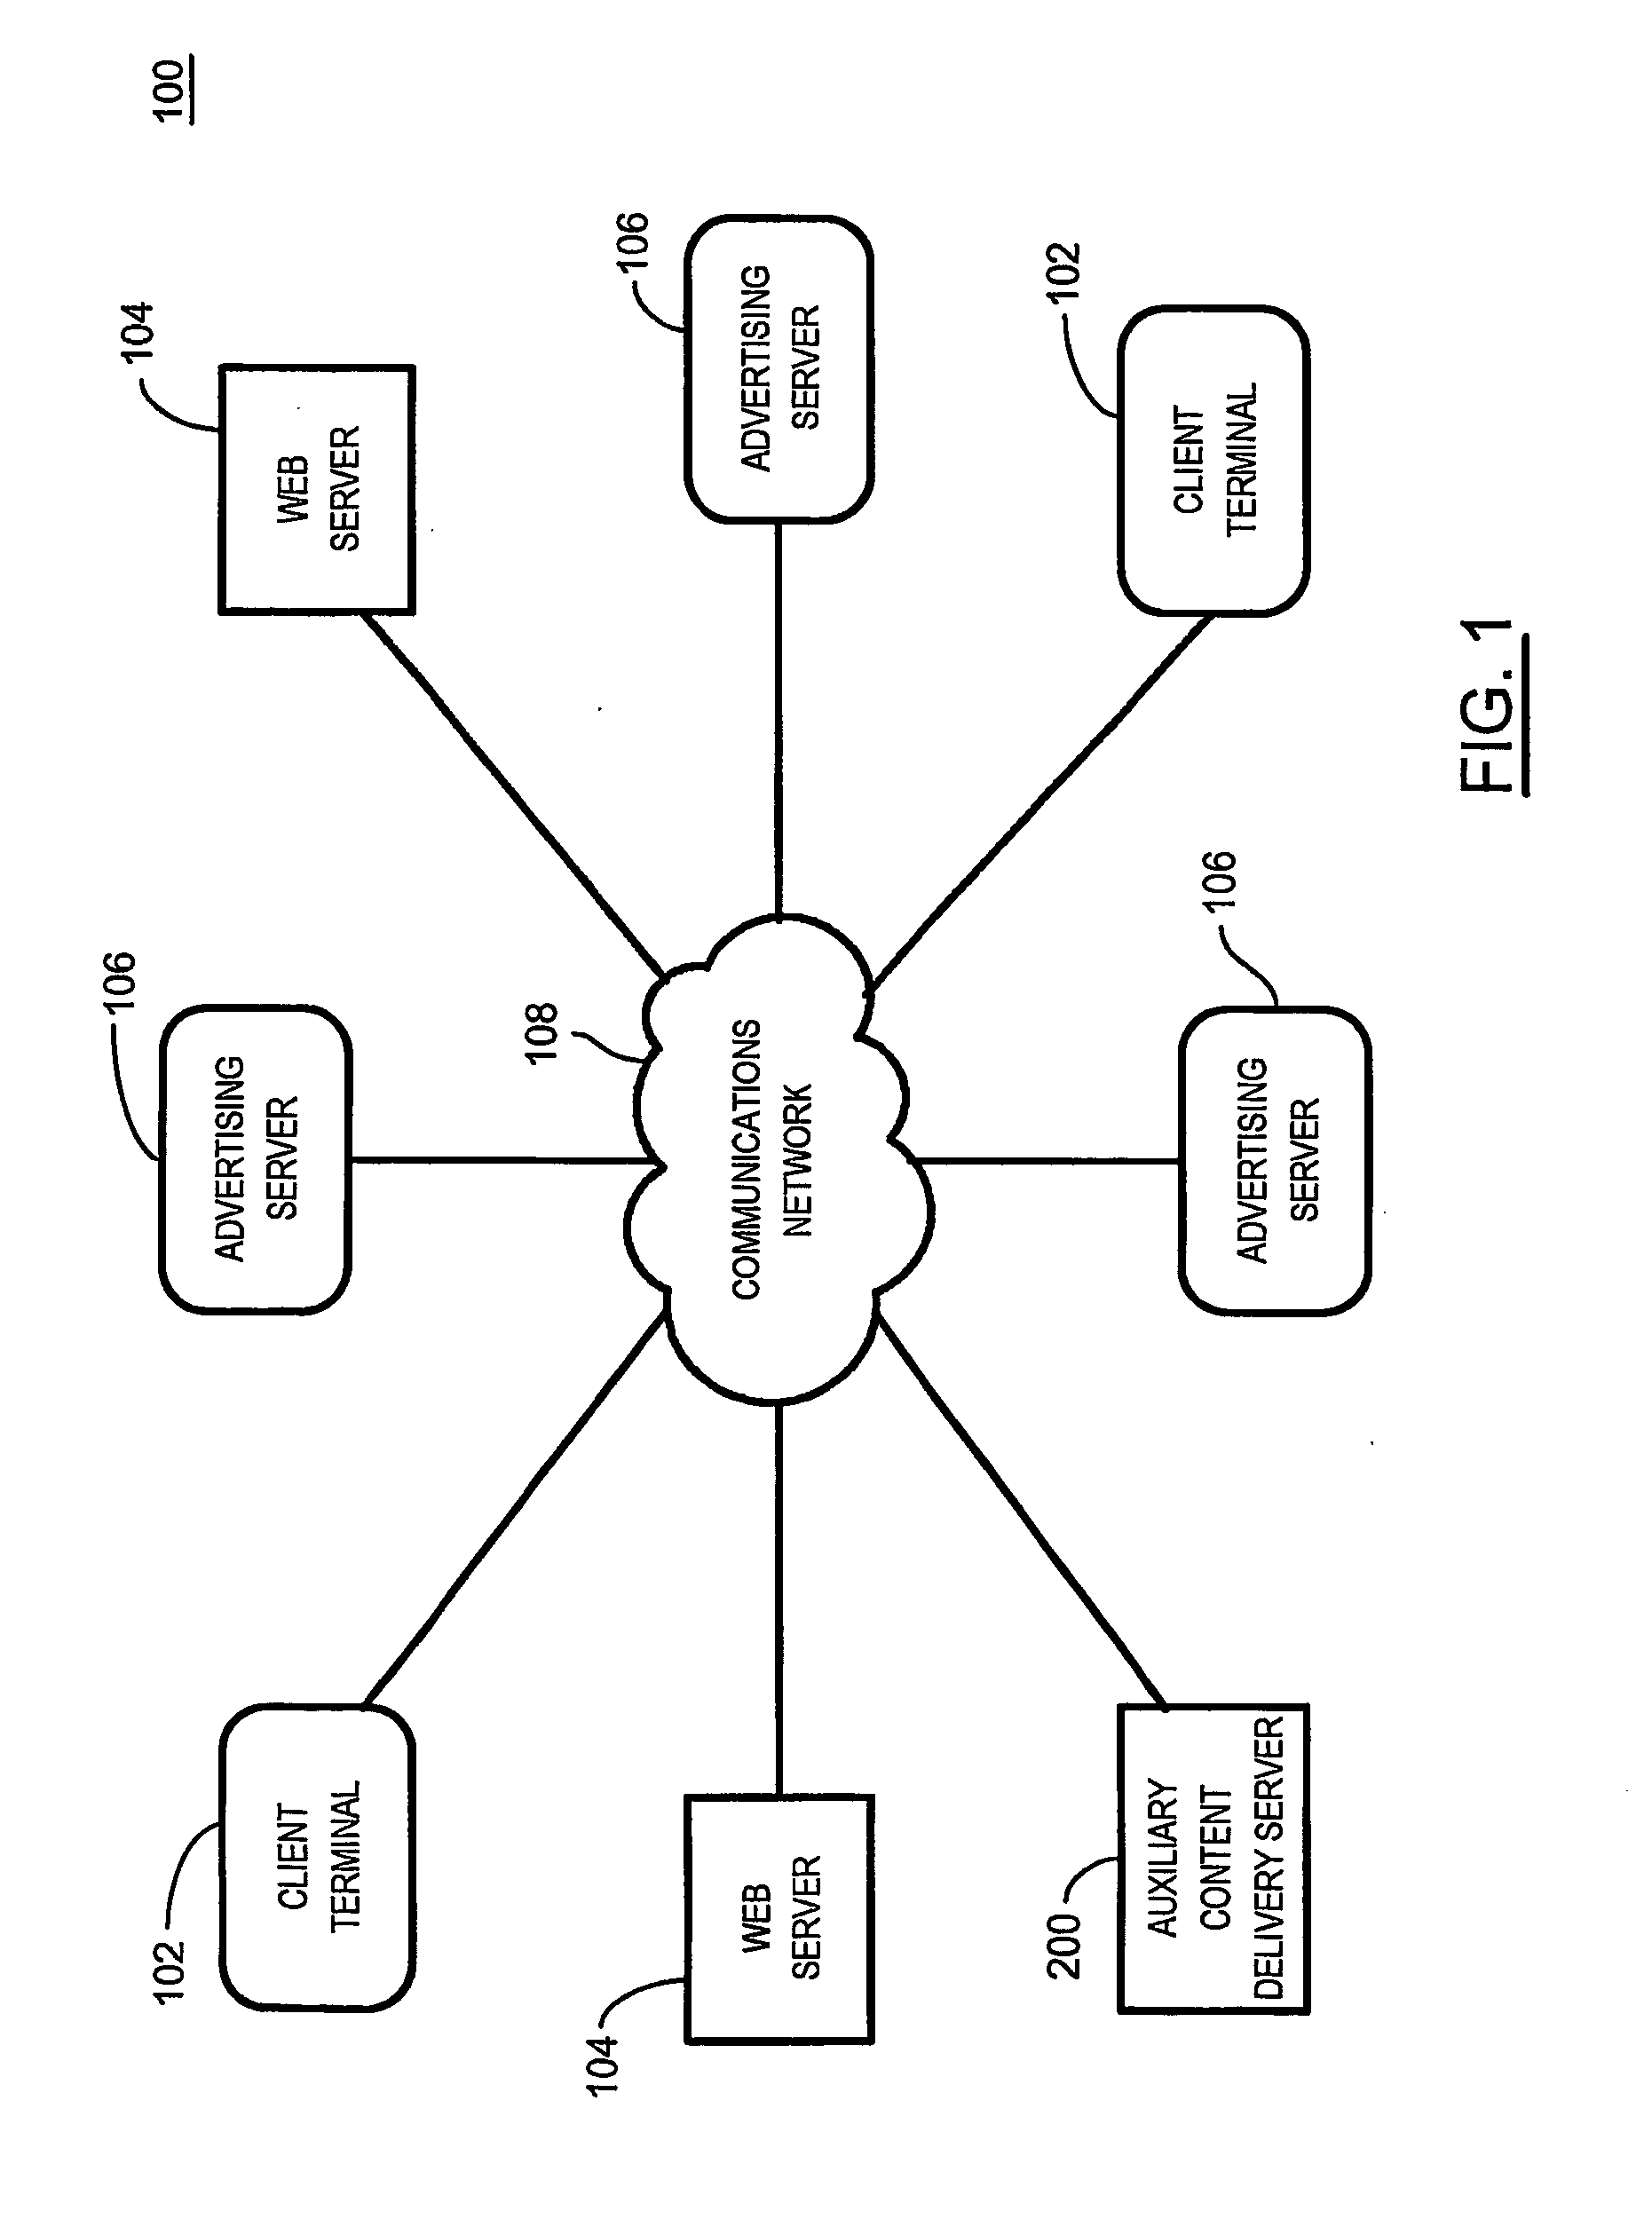 Auxiliary content delivery system